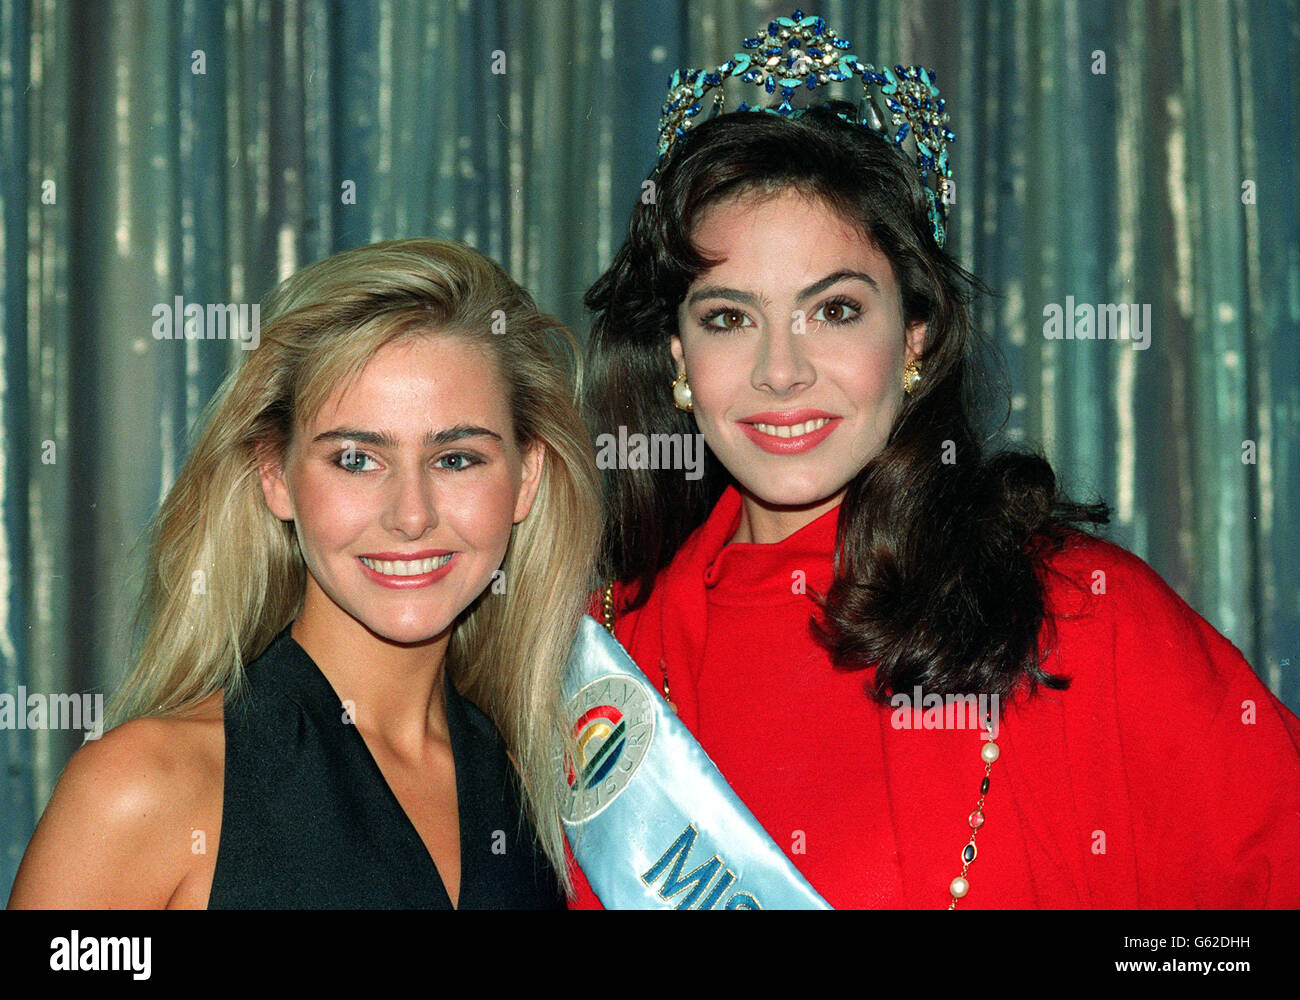 The New Miss World, Miss USA, 21-year-old Gina Marie Tolleson (right) with Miss Ireland, 20-year-old Siobhan McClafferty, who came second. Stock Photo